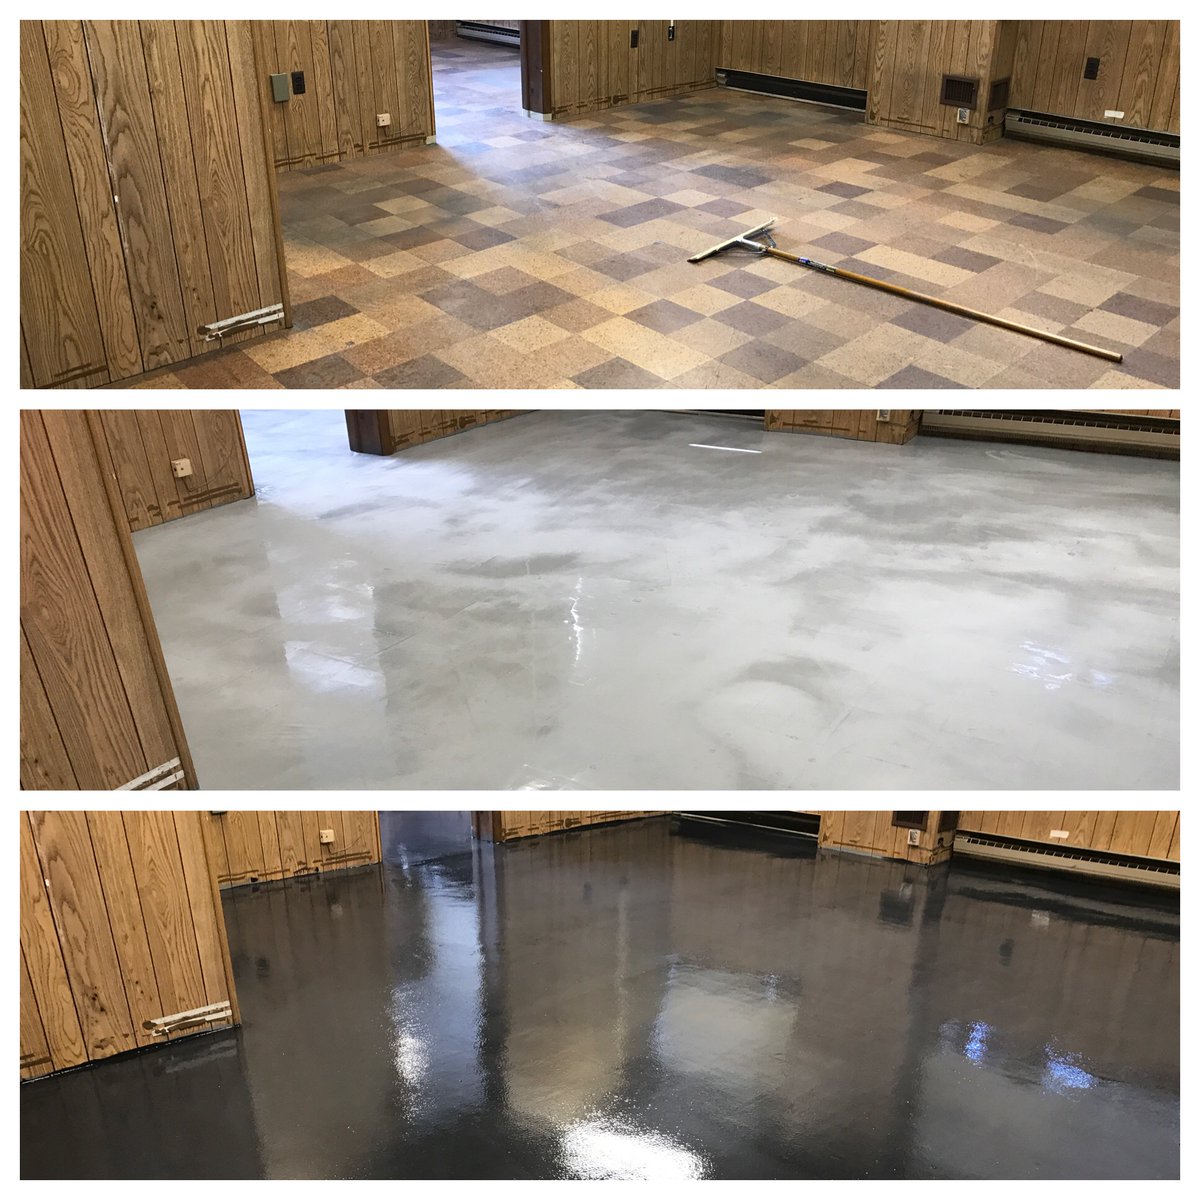 Encapsulation with epoxy can be an effective method for managing asbestos in situations where removal is not feasible or would pose greater risks of fiber release highperformancesystems.com #tbt #facilitymaintenance #EpoxyFlooring #epoxyfloorcoating #asbestosencapsulation